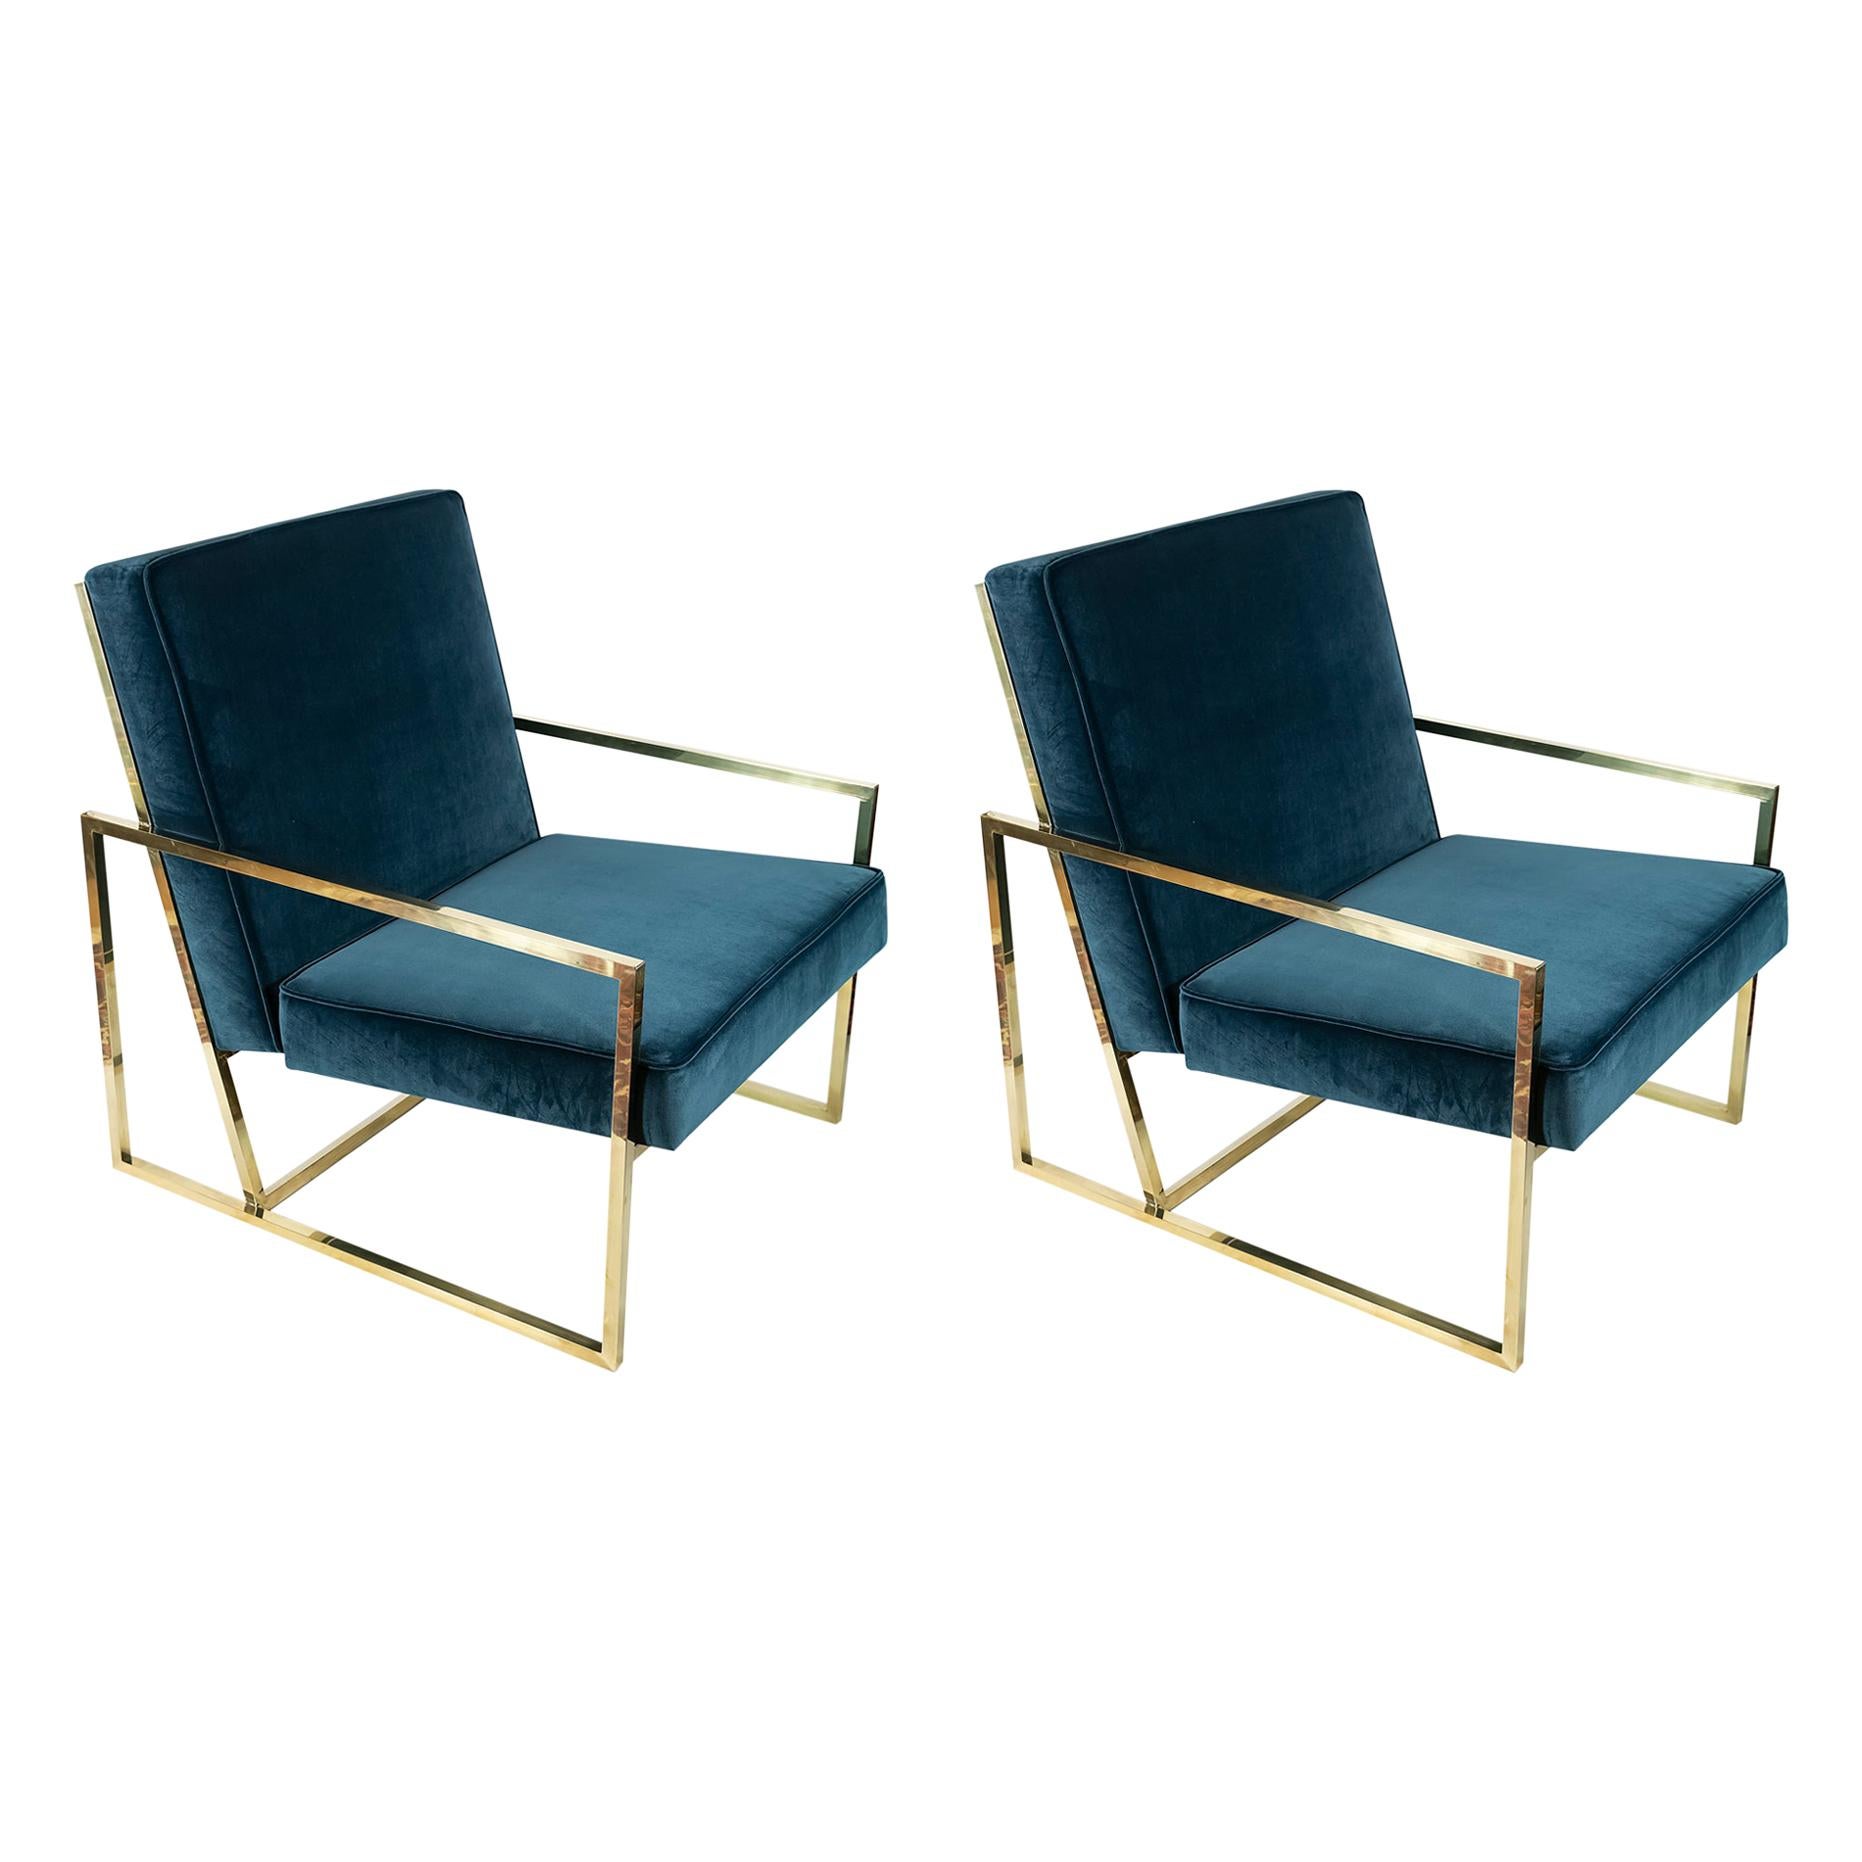 Pair of Midcentury Design Italian Brass Frame and Velour Armchairs